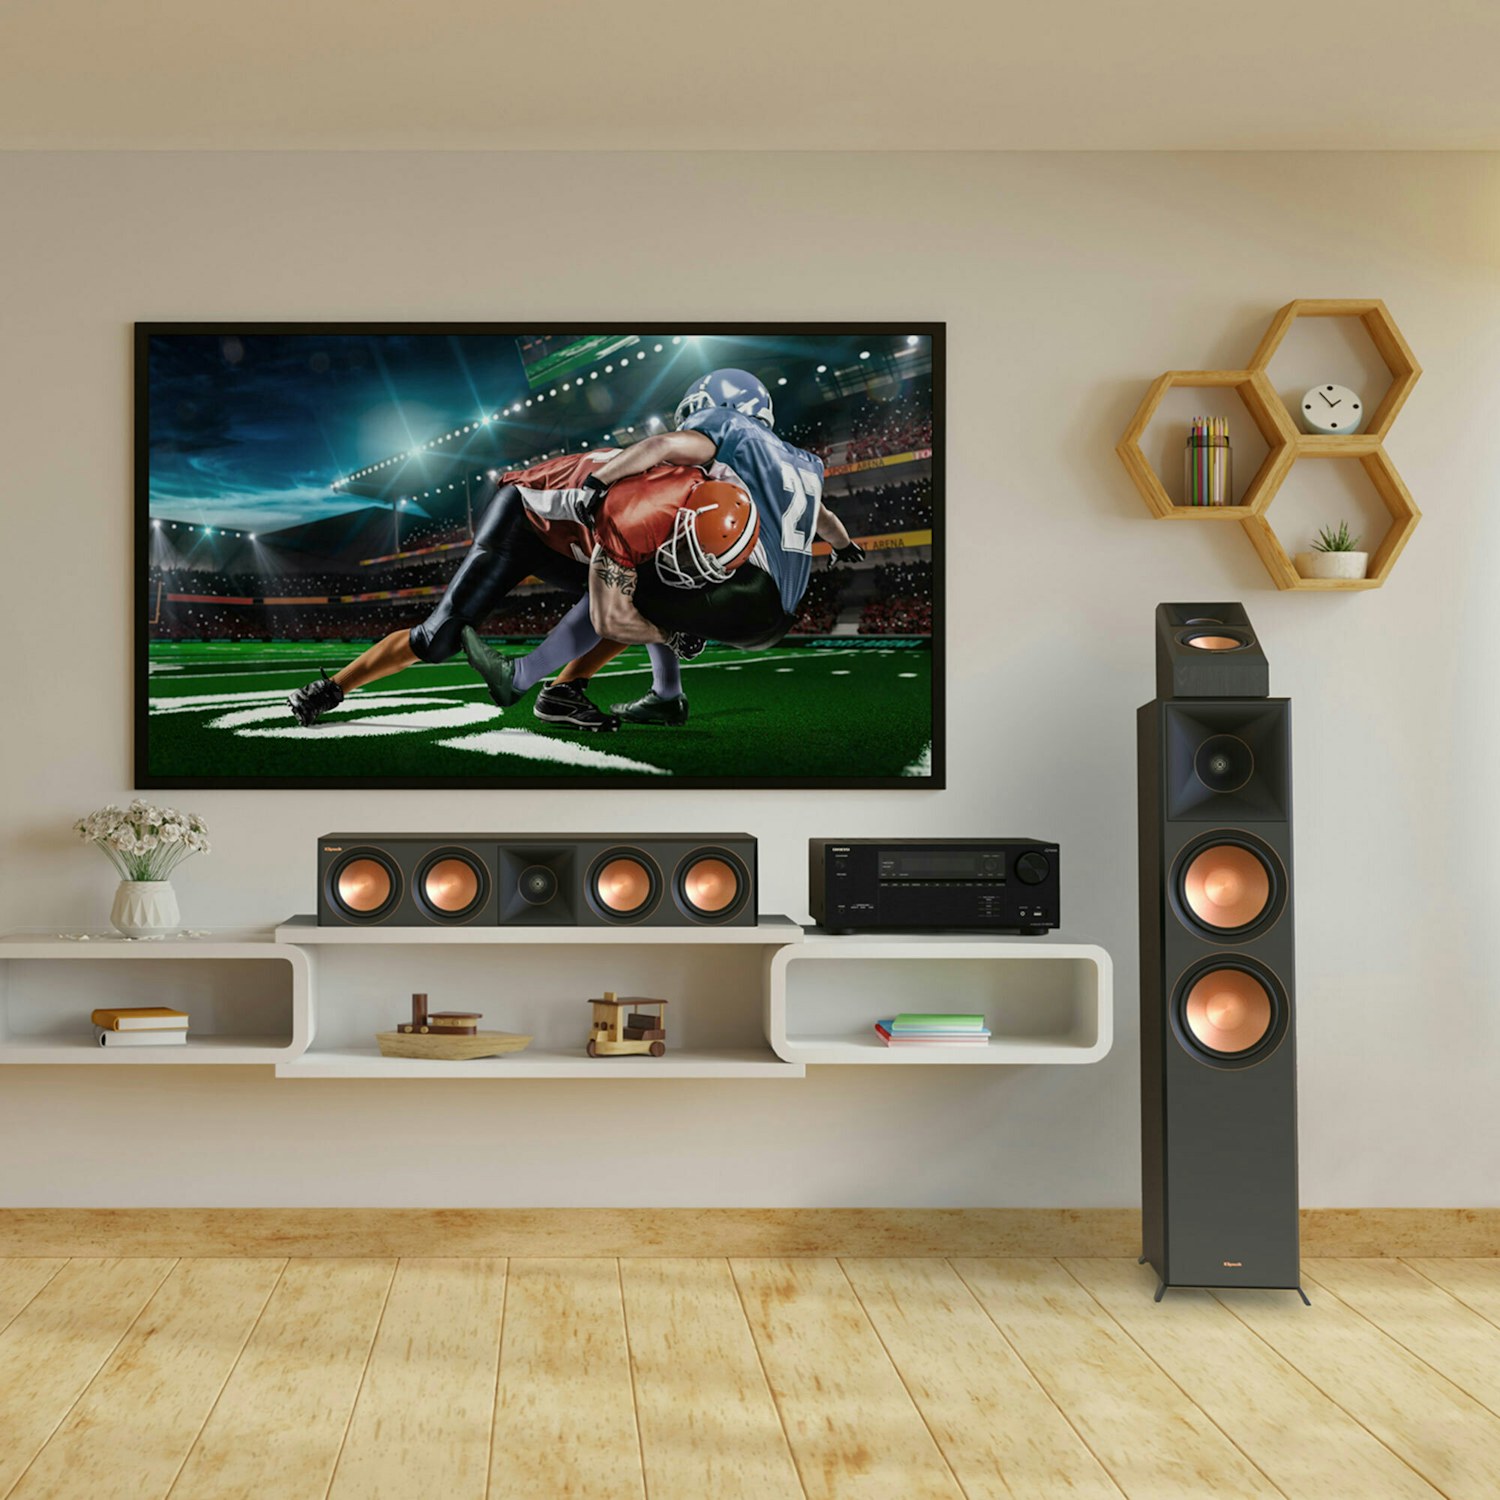 Reference Premiere 502 and Onkyo TX NR6100 System in Stylish Home Sports on TV MOBILE